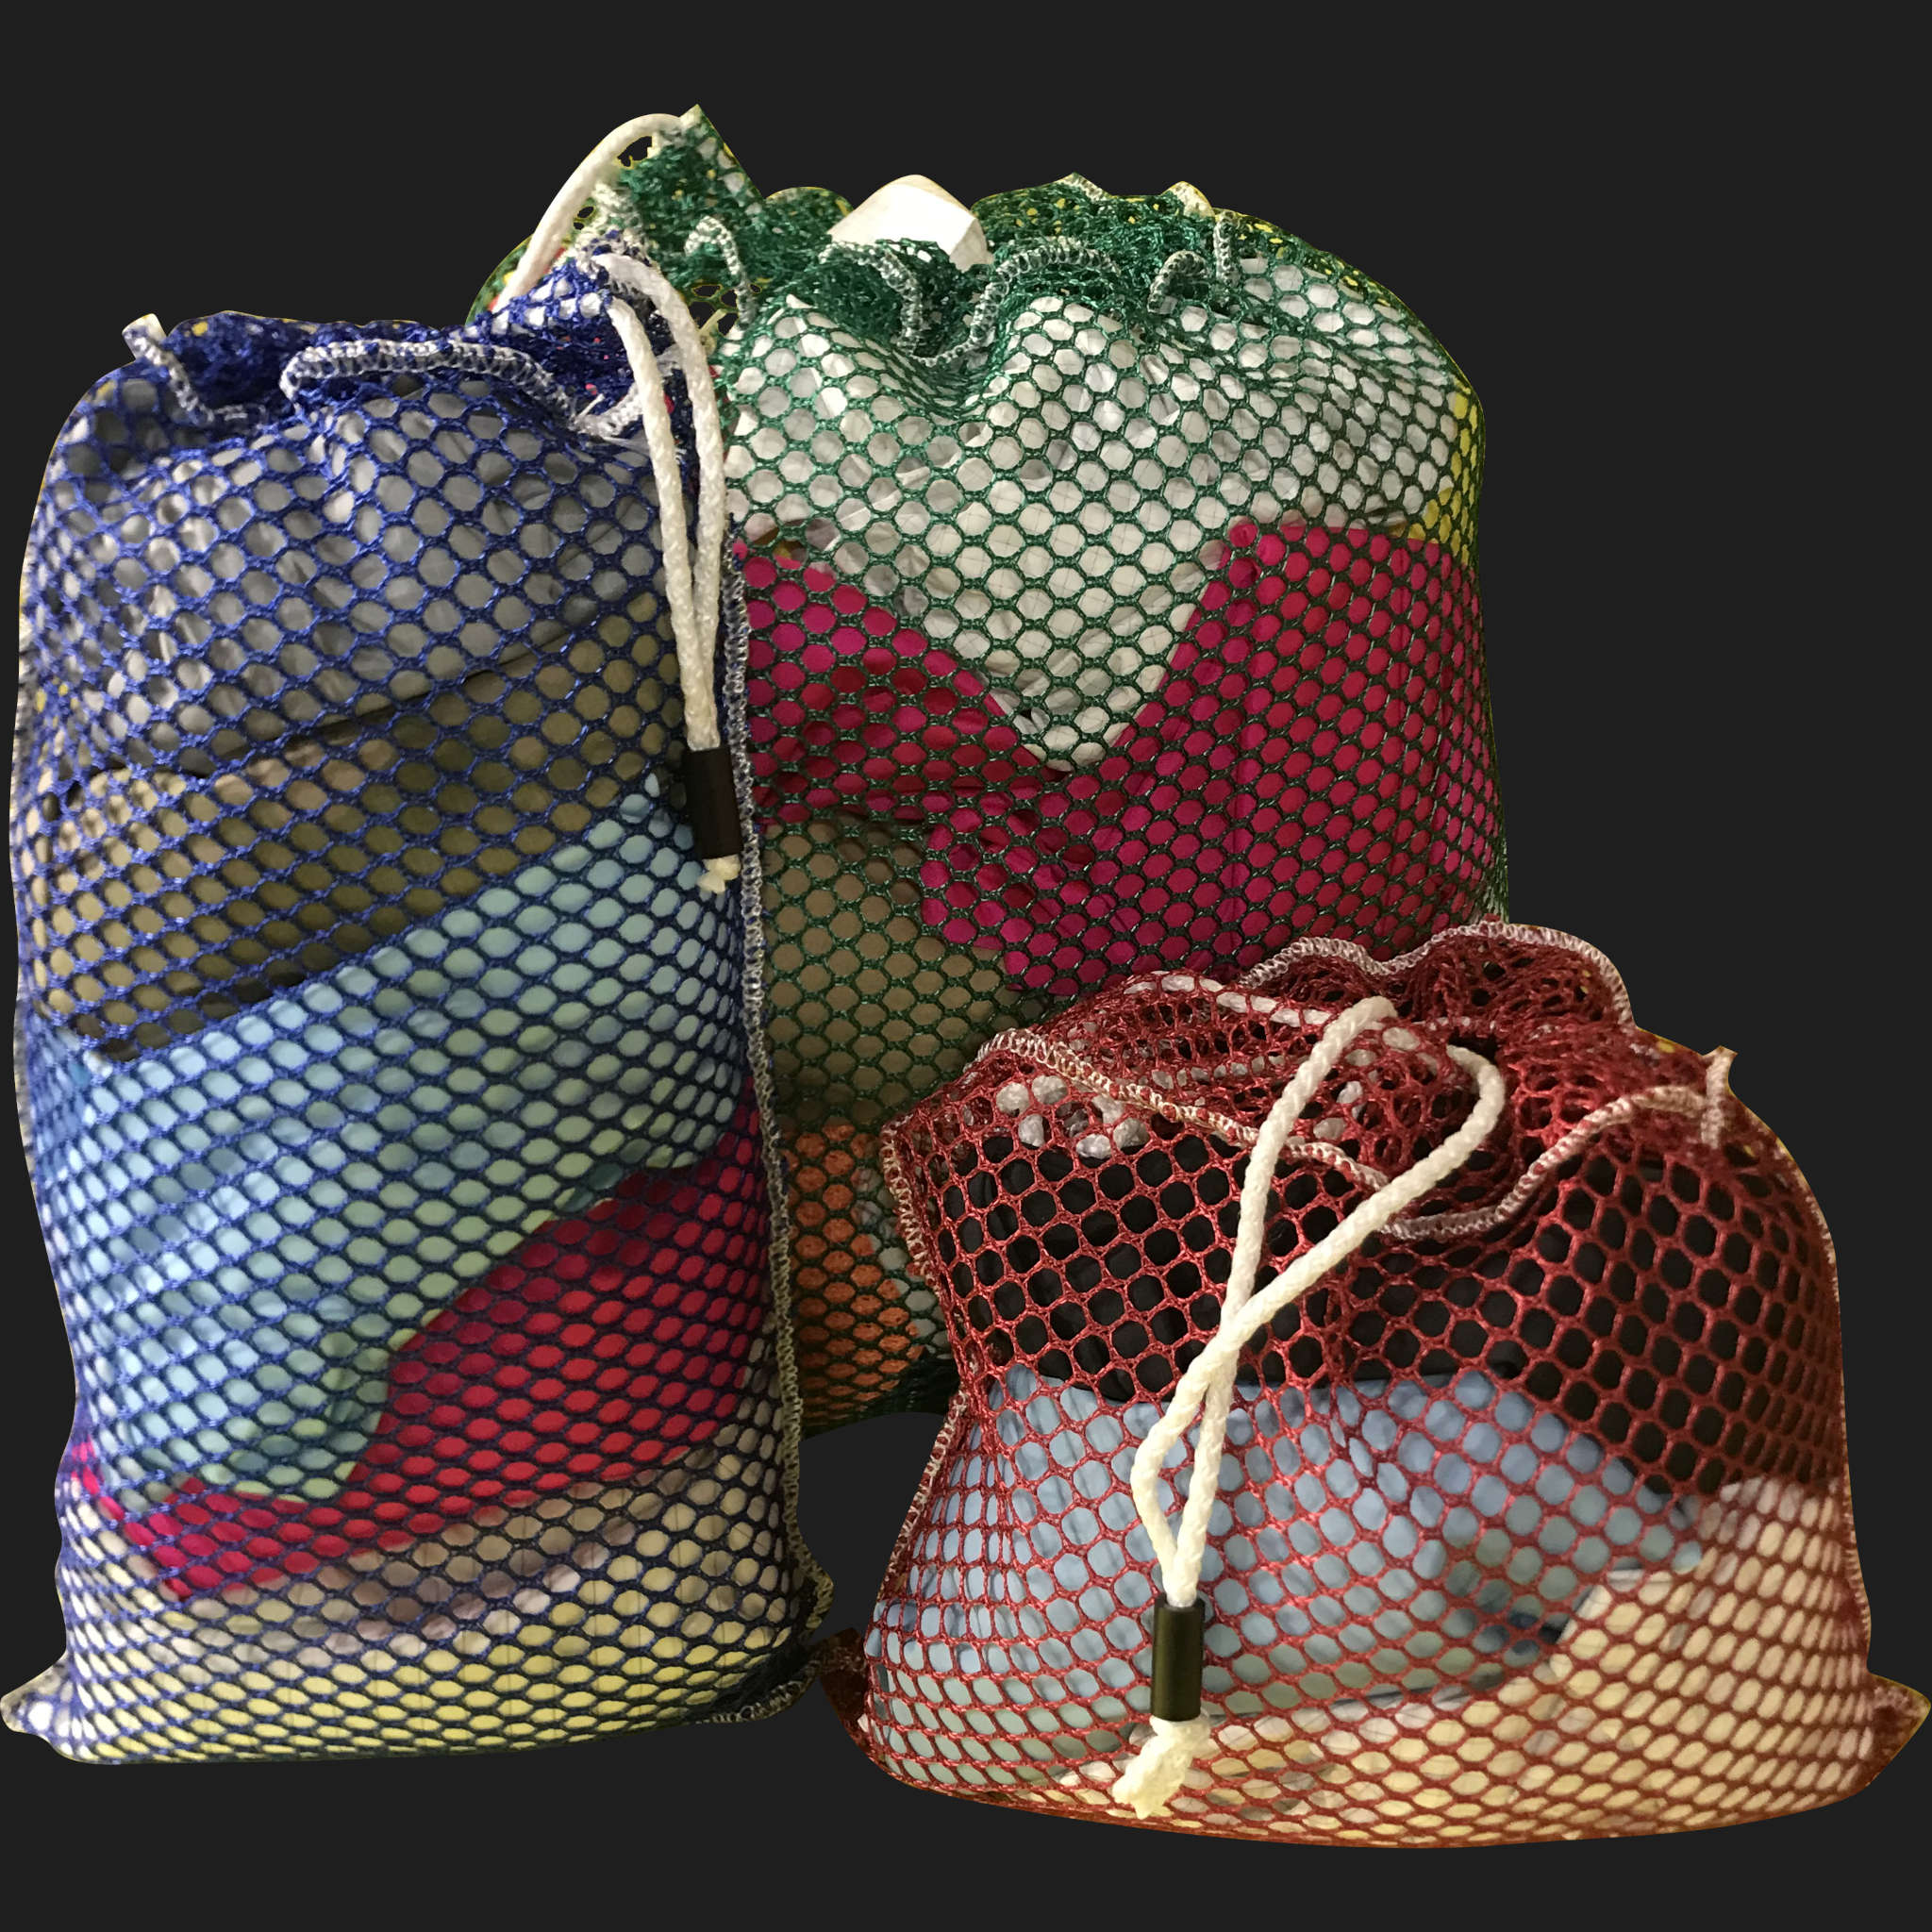 28" x 54" Customized Mesh-Net-Laundry Bags Heavy Duty with Cord and barrellock closure